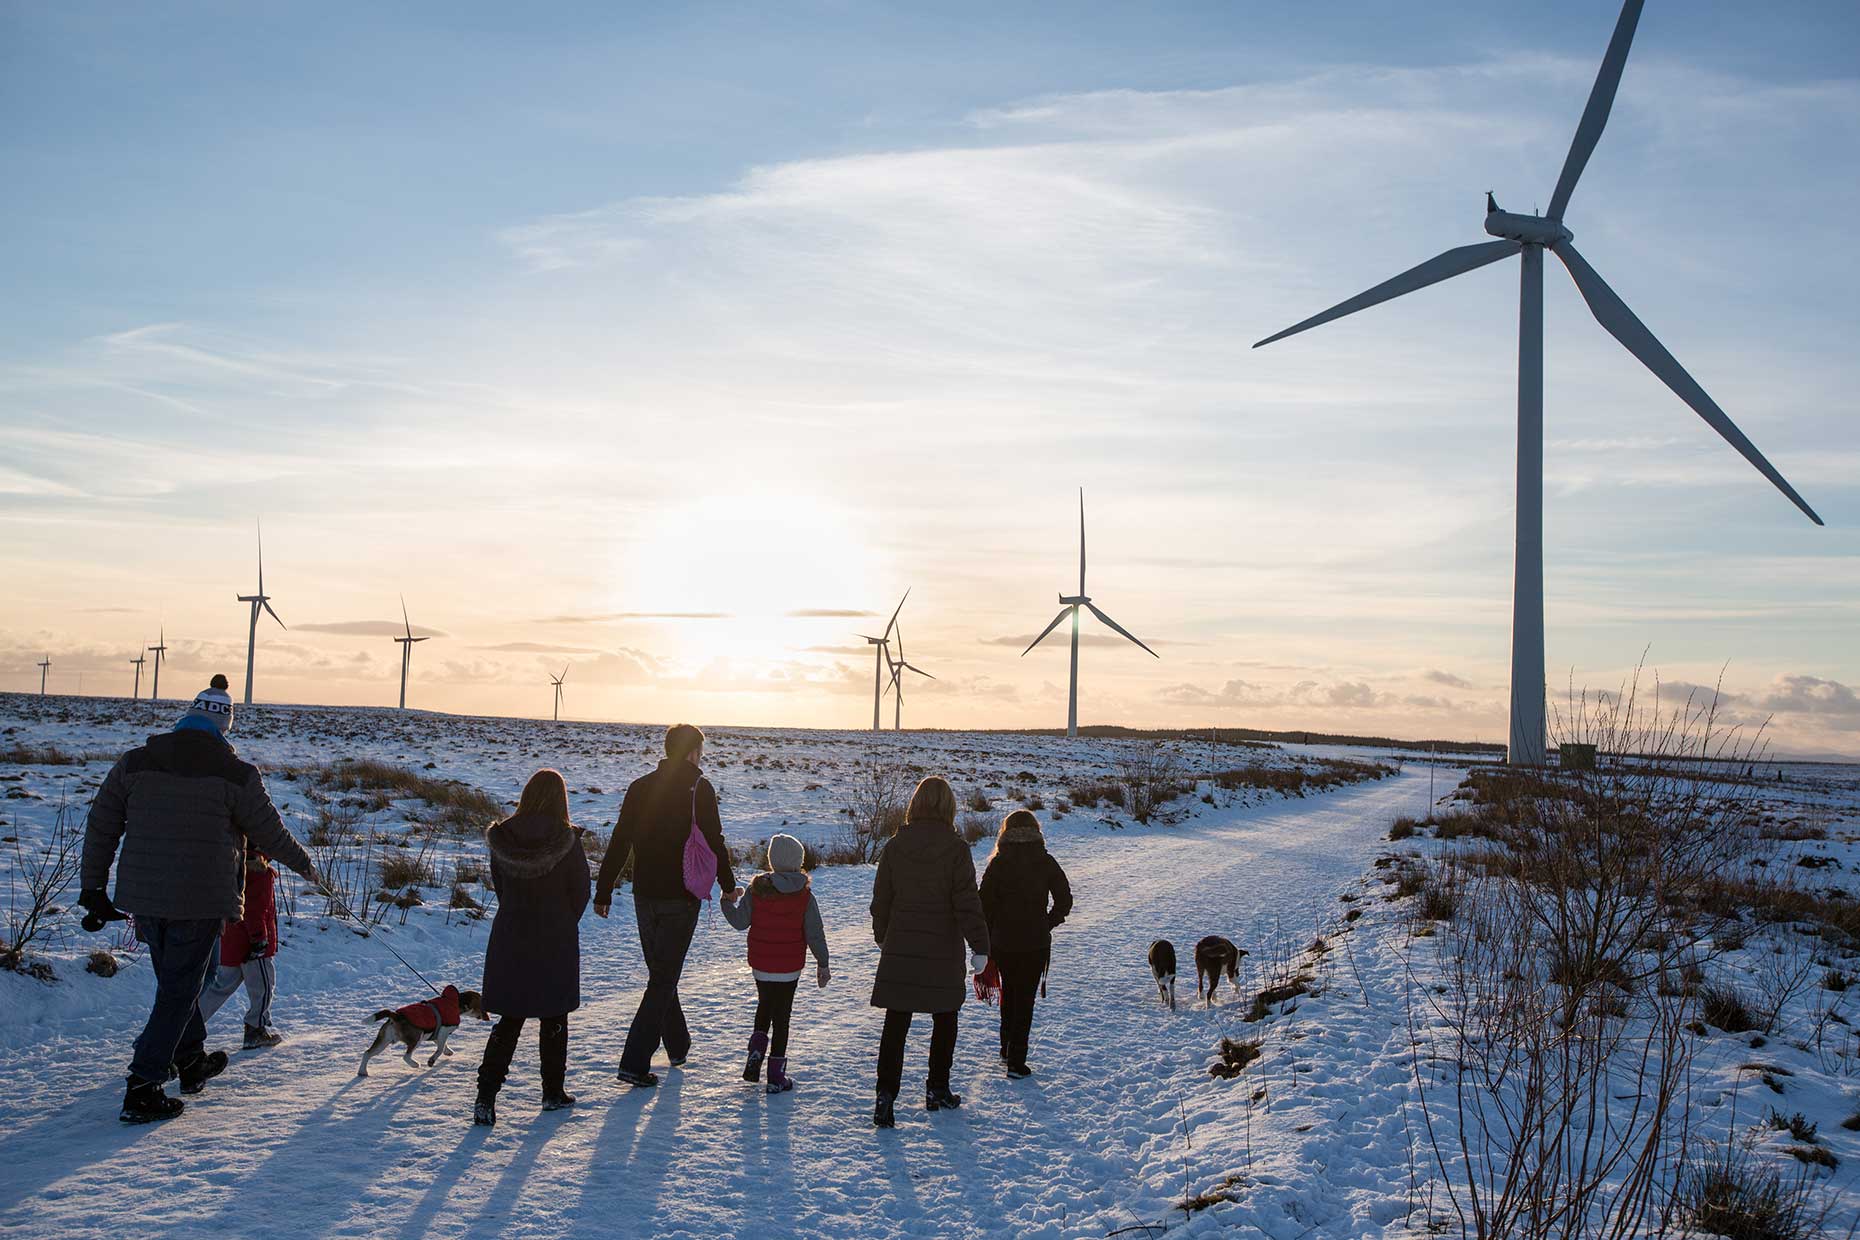 Family walking in snow at Whitelee wind farm, by Scotland Greenpeace photographer